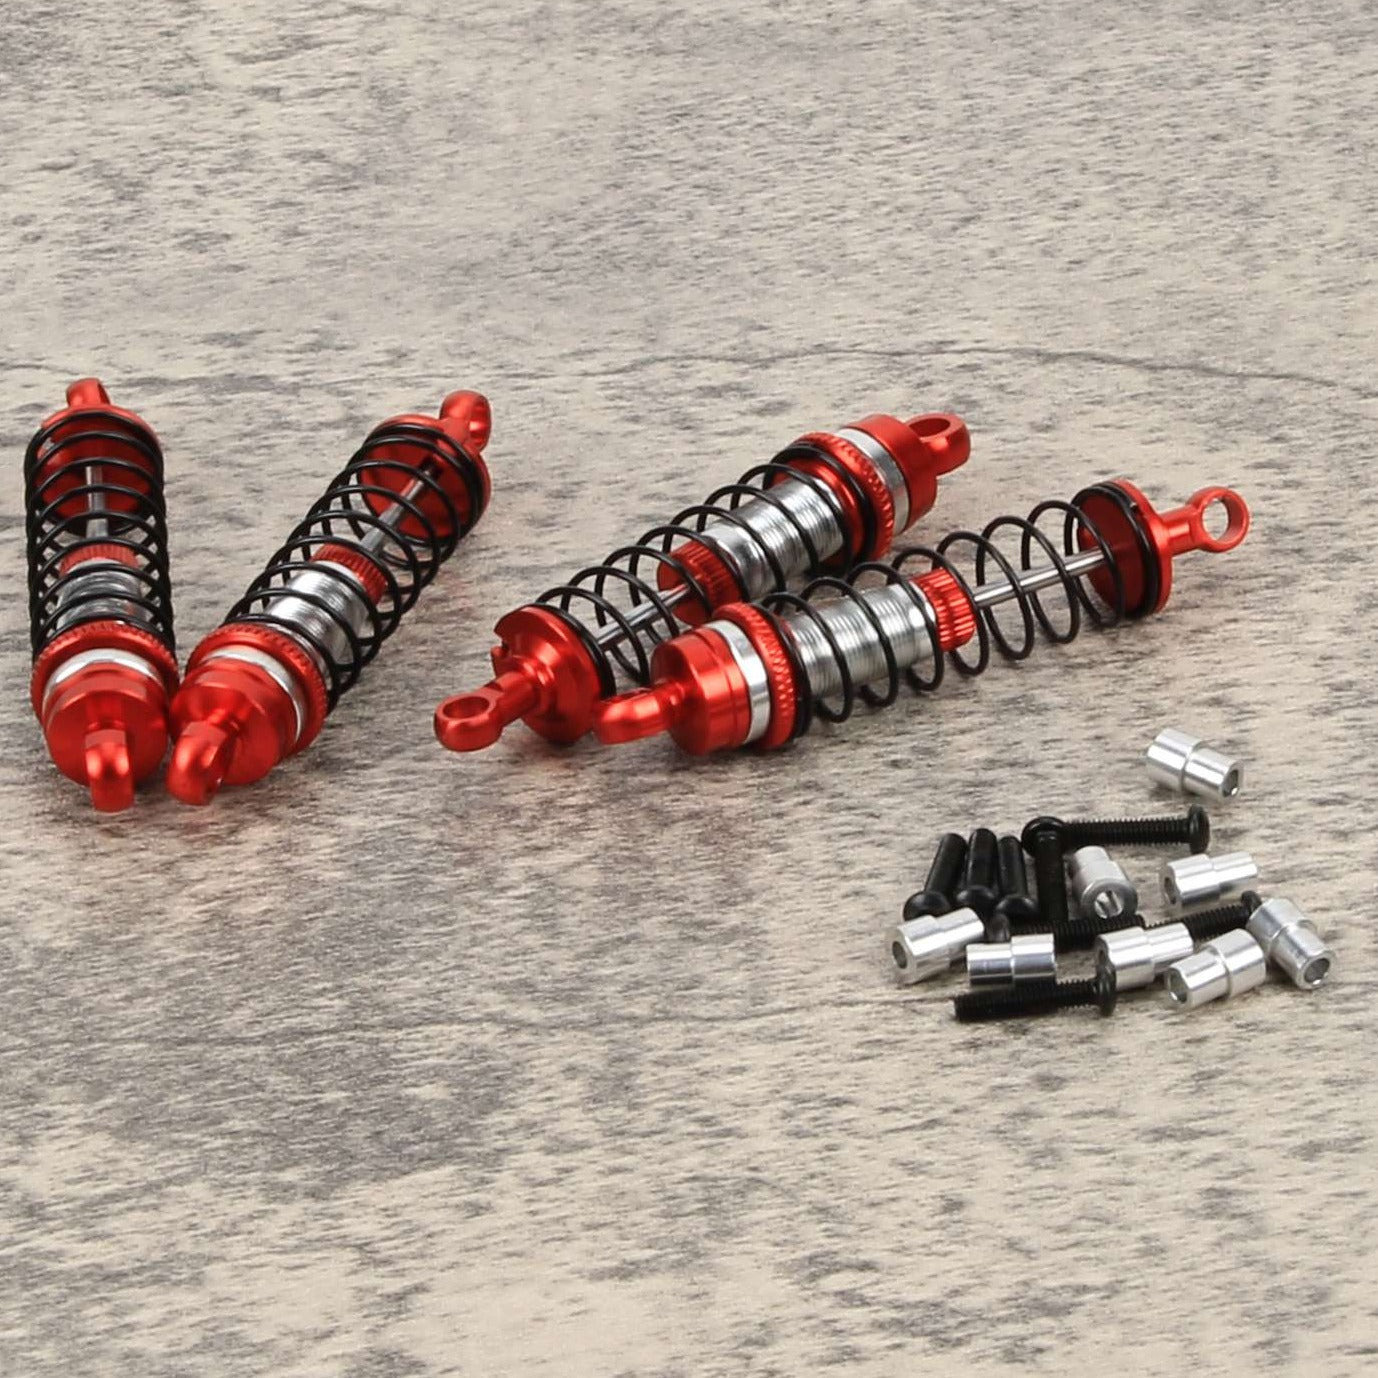 RCAWD Traxxas Latrax RCAWD Oil-filled Assembled with Springs Shocks 2pcs for 1/18 Traxxas Latrax Upgrades